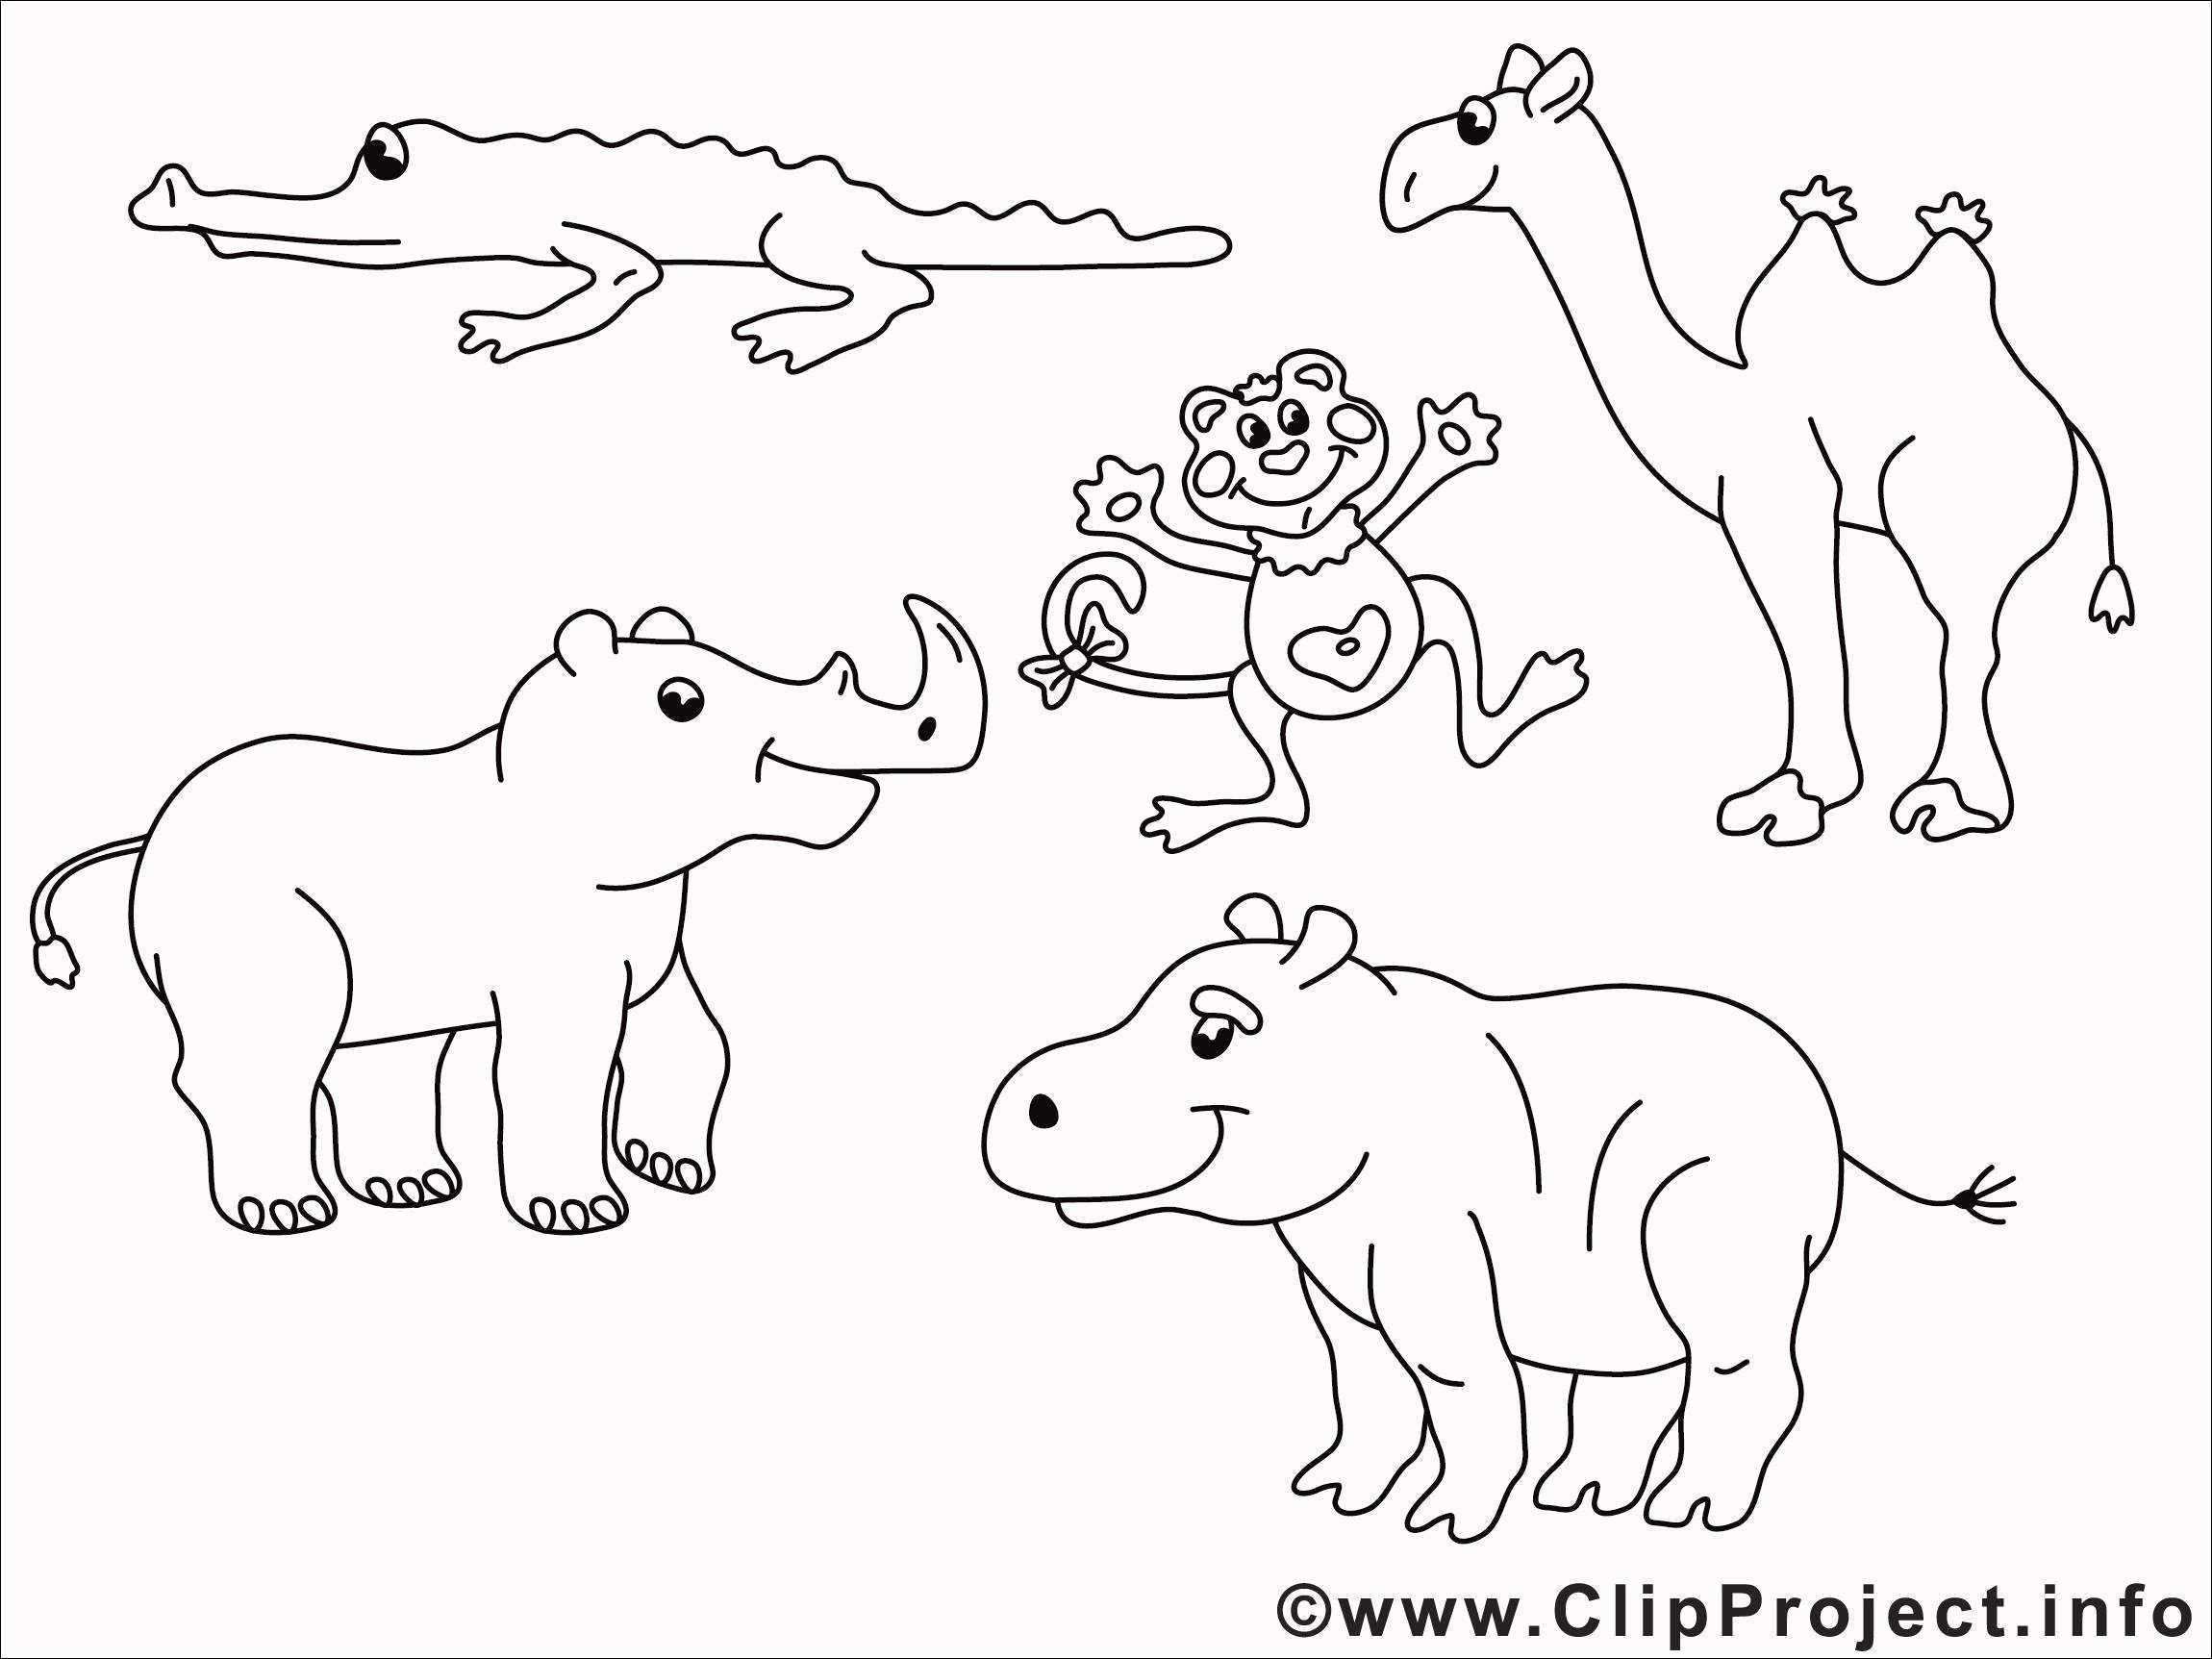 Frisch Malvorlagen Tiere Bauernhof Kostenlos Cat Coloring Book Zoo Coloring Pages Coloring Pictures Of Animals